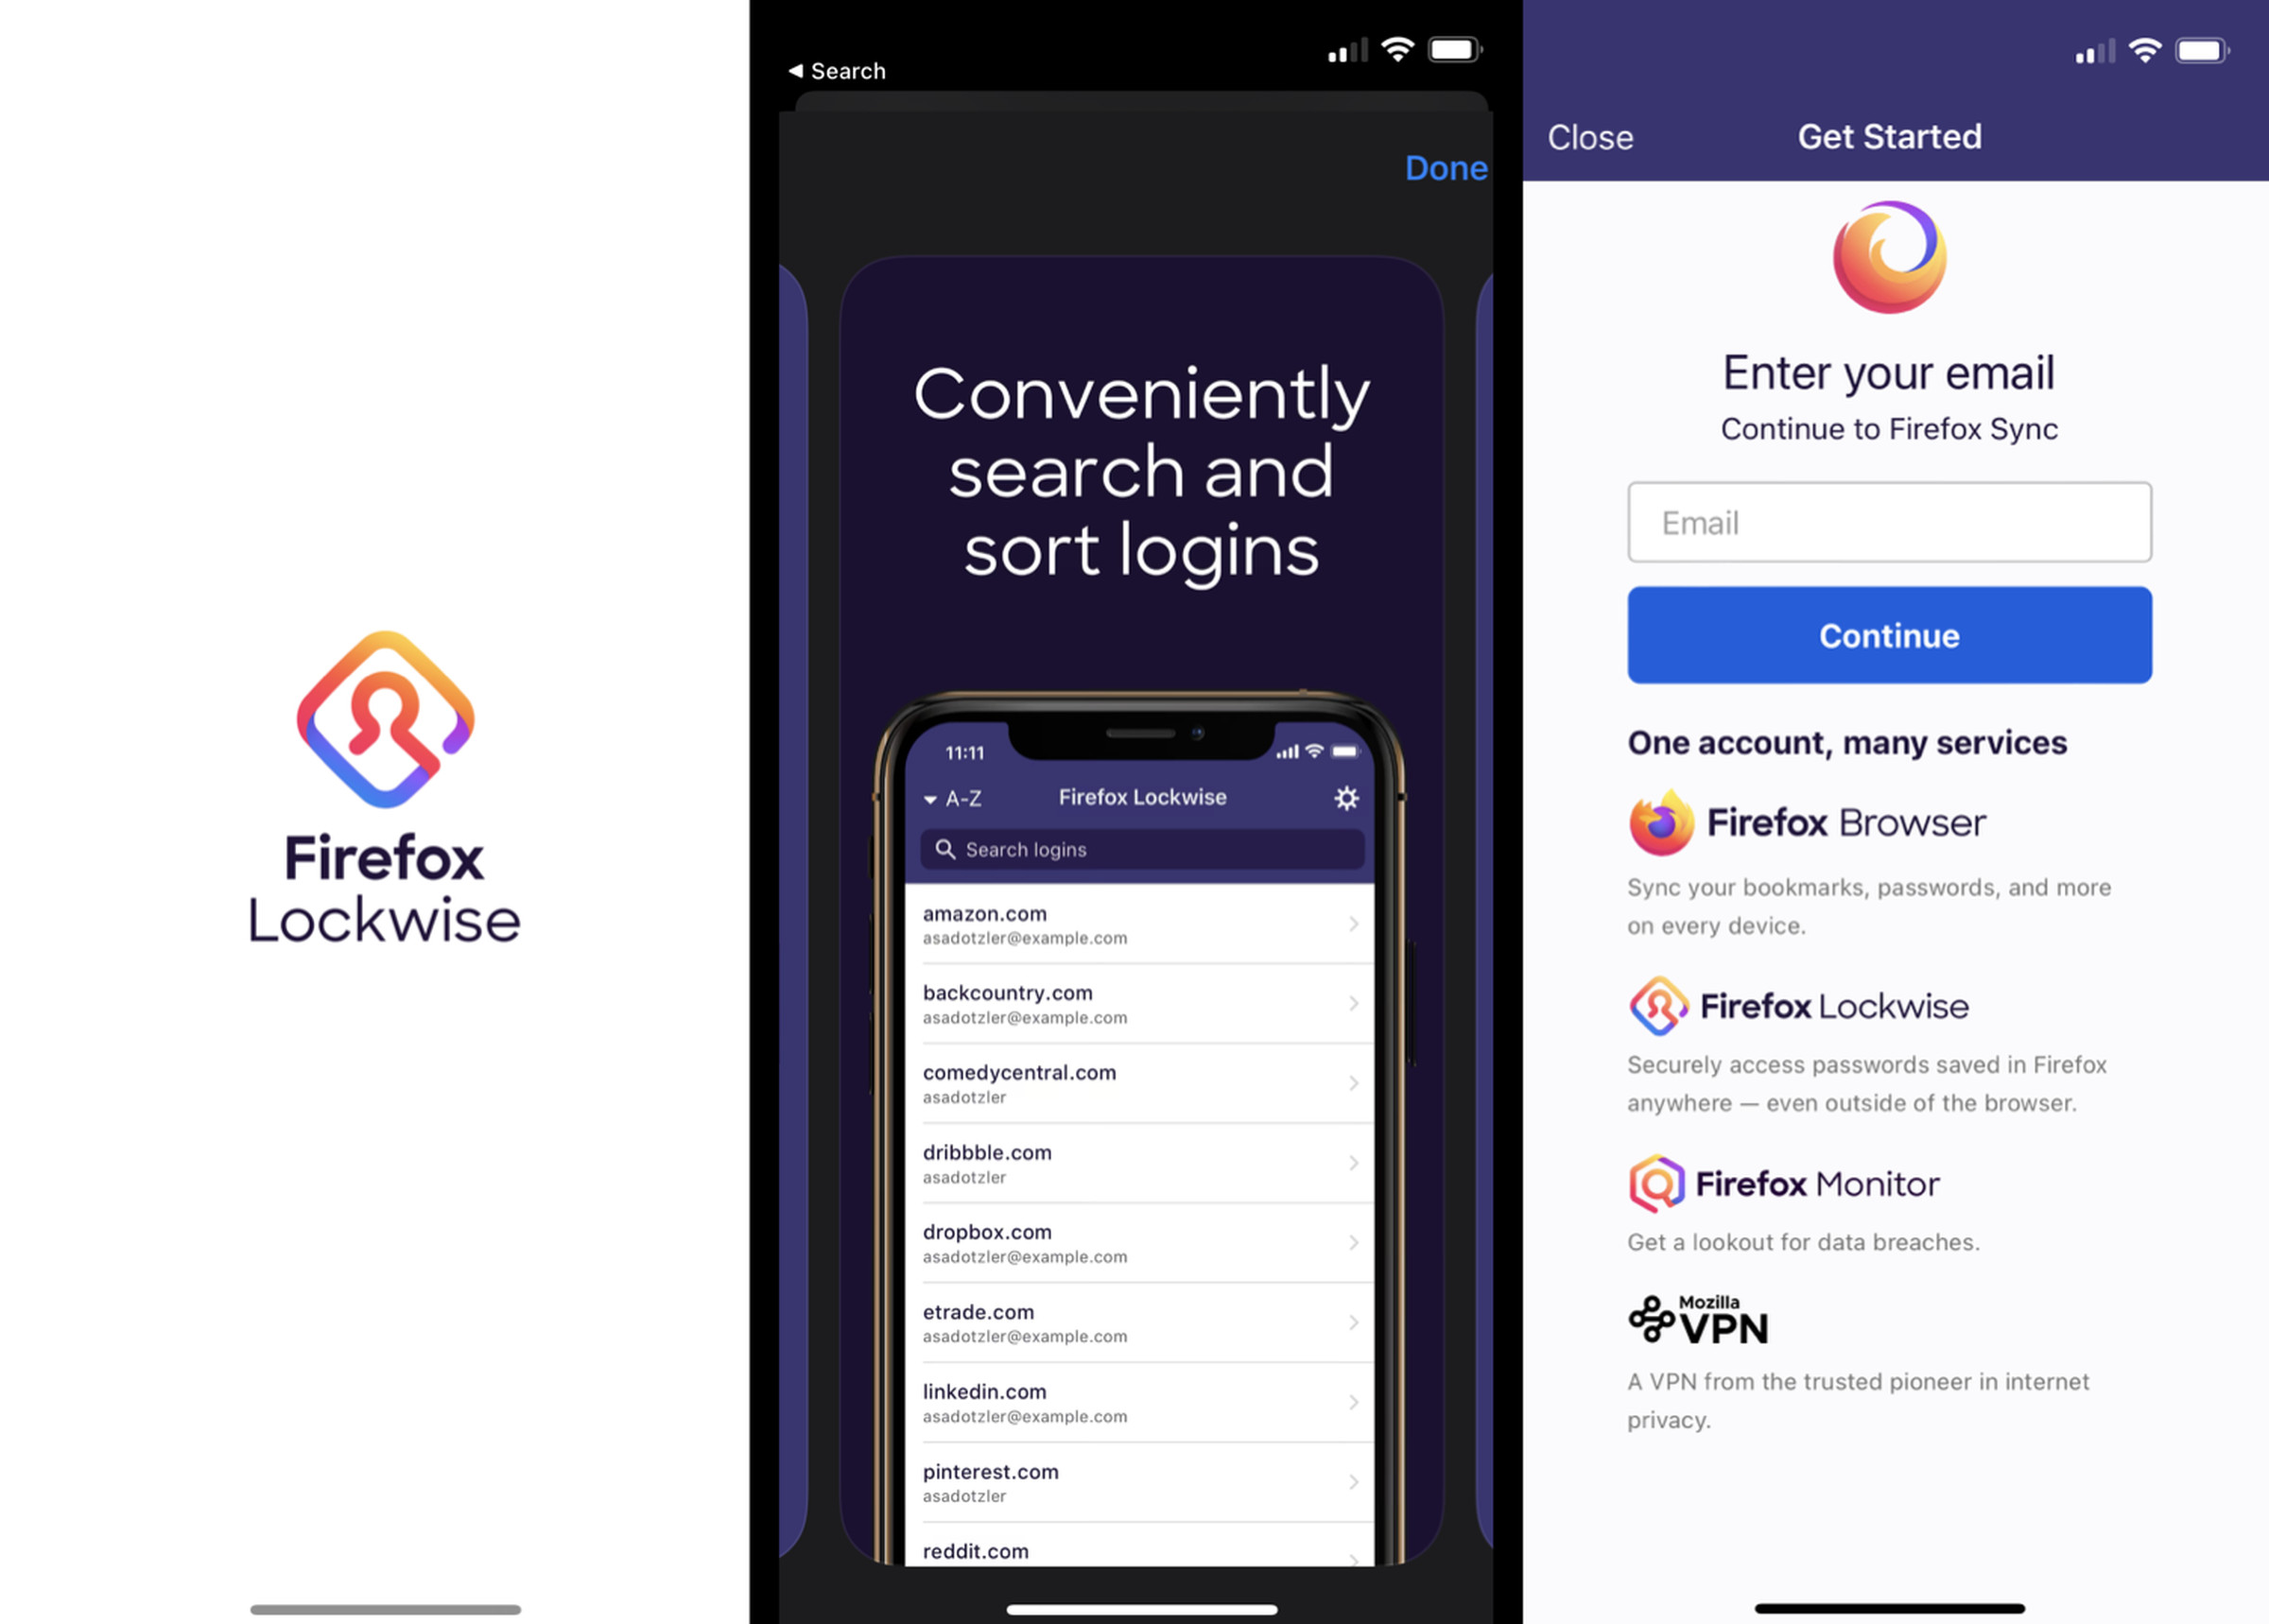 Three screenshots of the Firefox lockwise app showing features